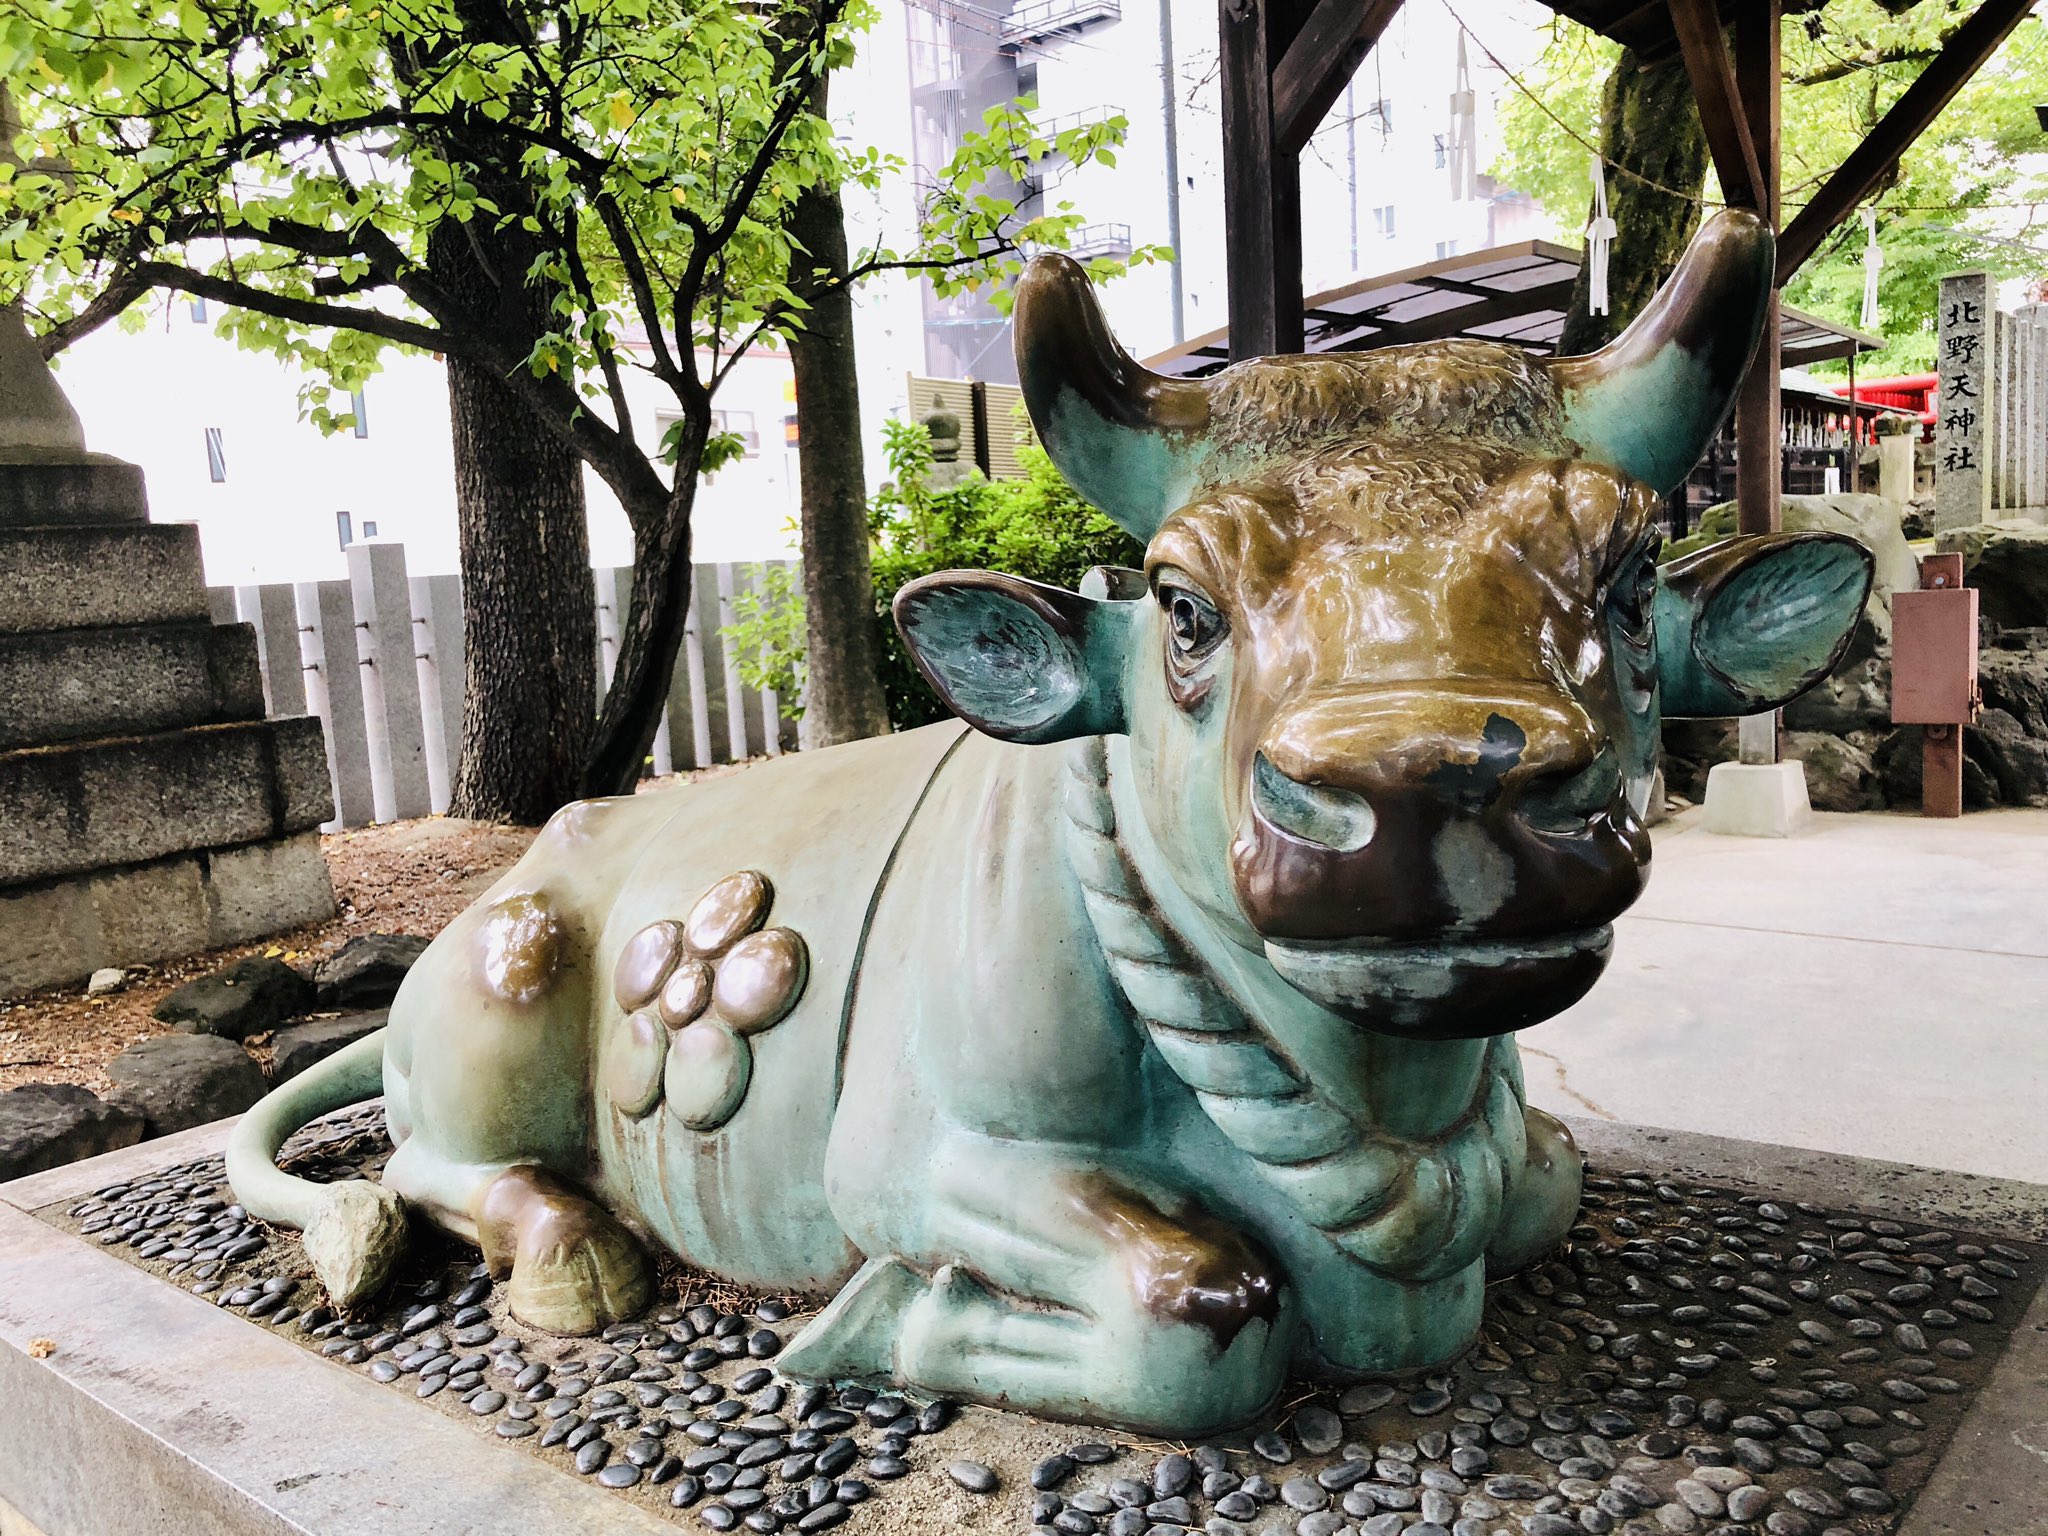 Eo 愛嬌のある撫で牛 治したいところを撫でると病が治ると言われています A Charming Cow Statue It Is Believed That We Will Cure The Illness Stroking Any Part Of This Cow Where You Cure 神社 名古屋市 Shrine Takamushrine Nagoya